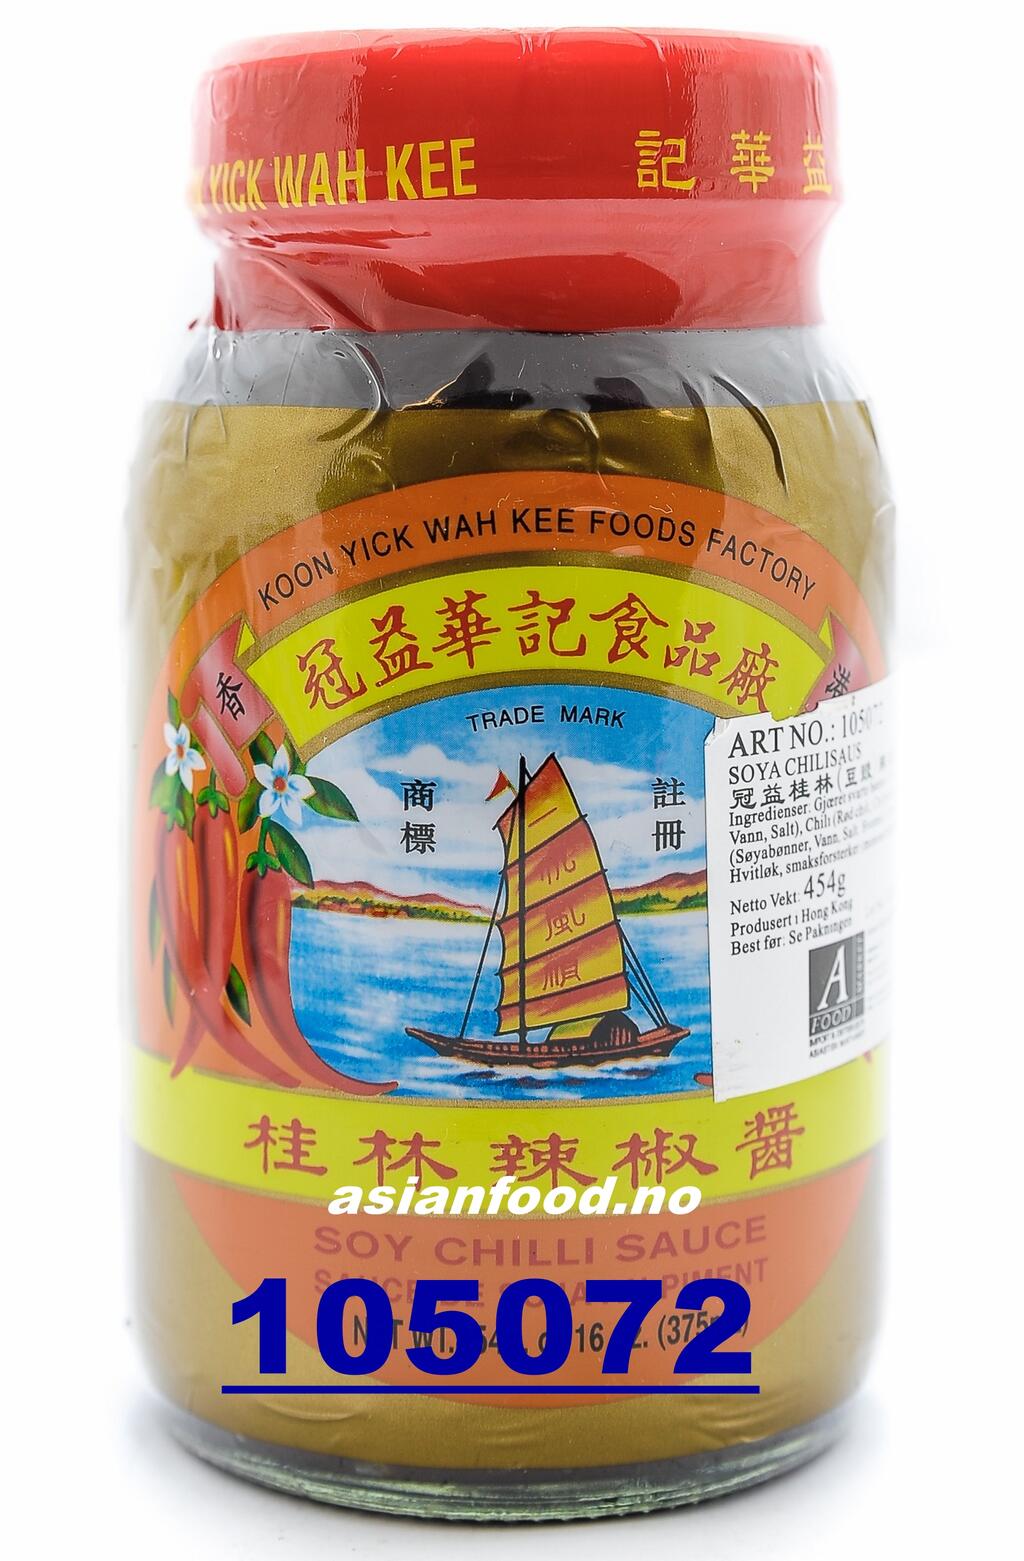 KOON YICK WAH KEE Soy chili sauce Ot sate CANH BUOM 24x454g HK - Asian ...